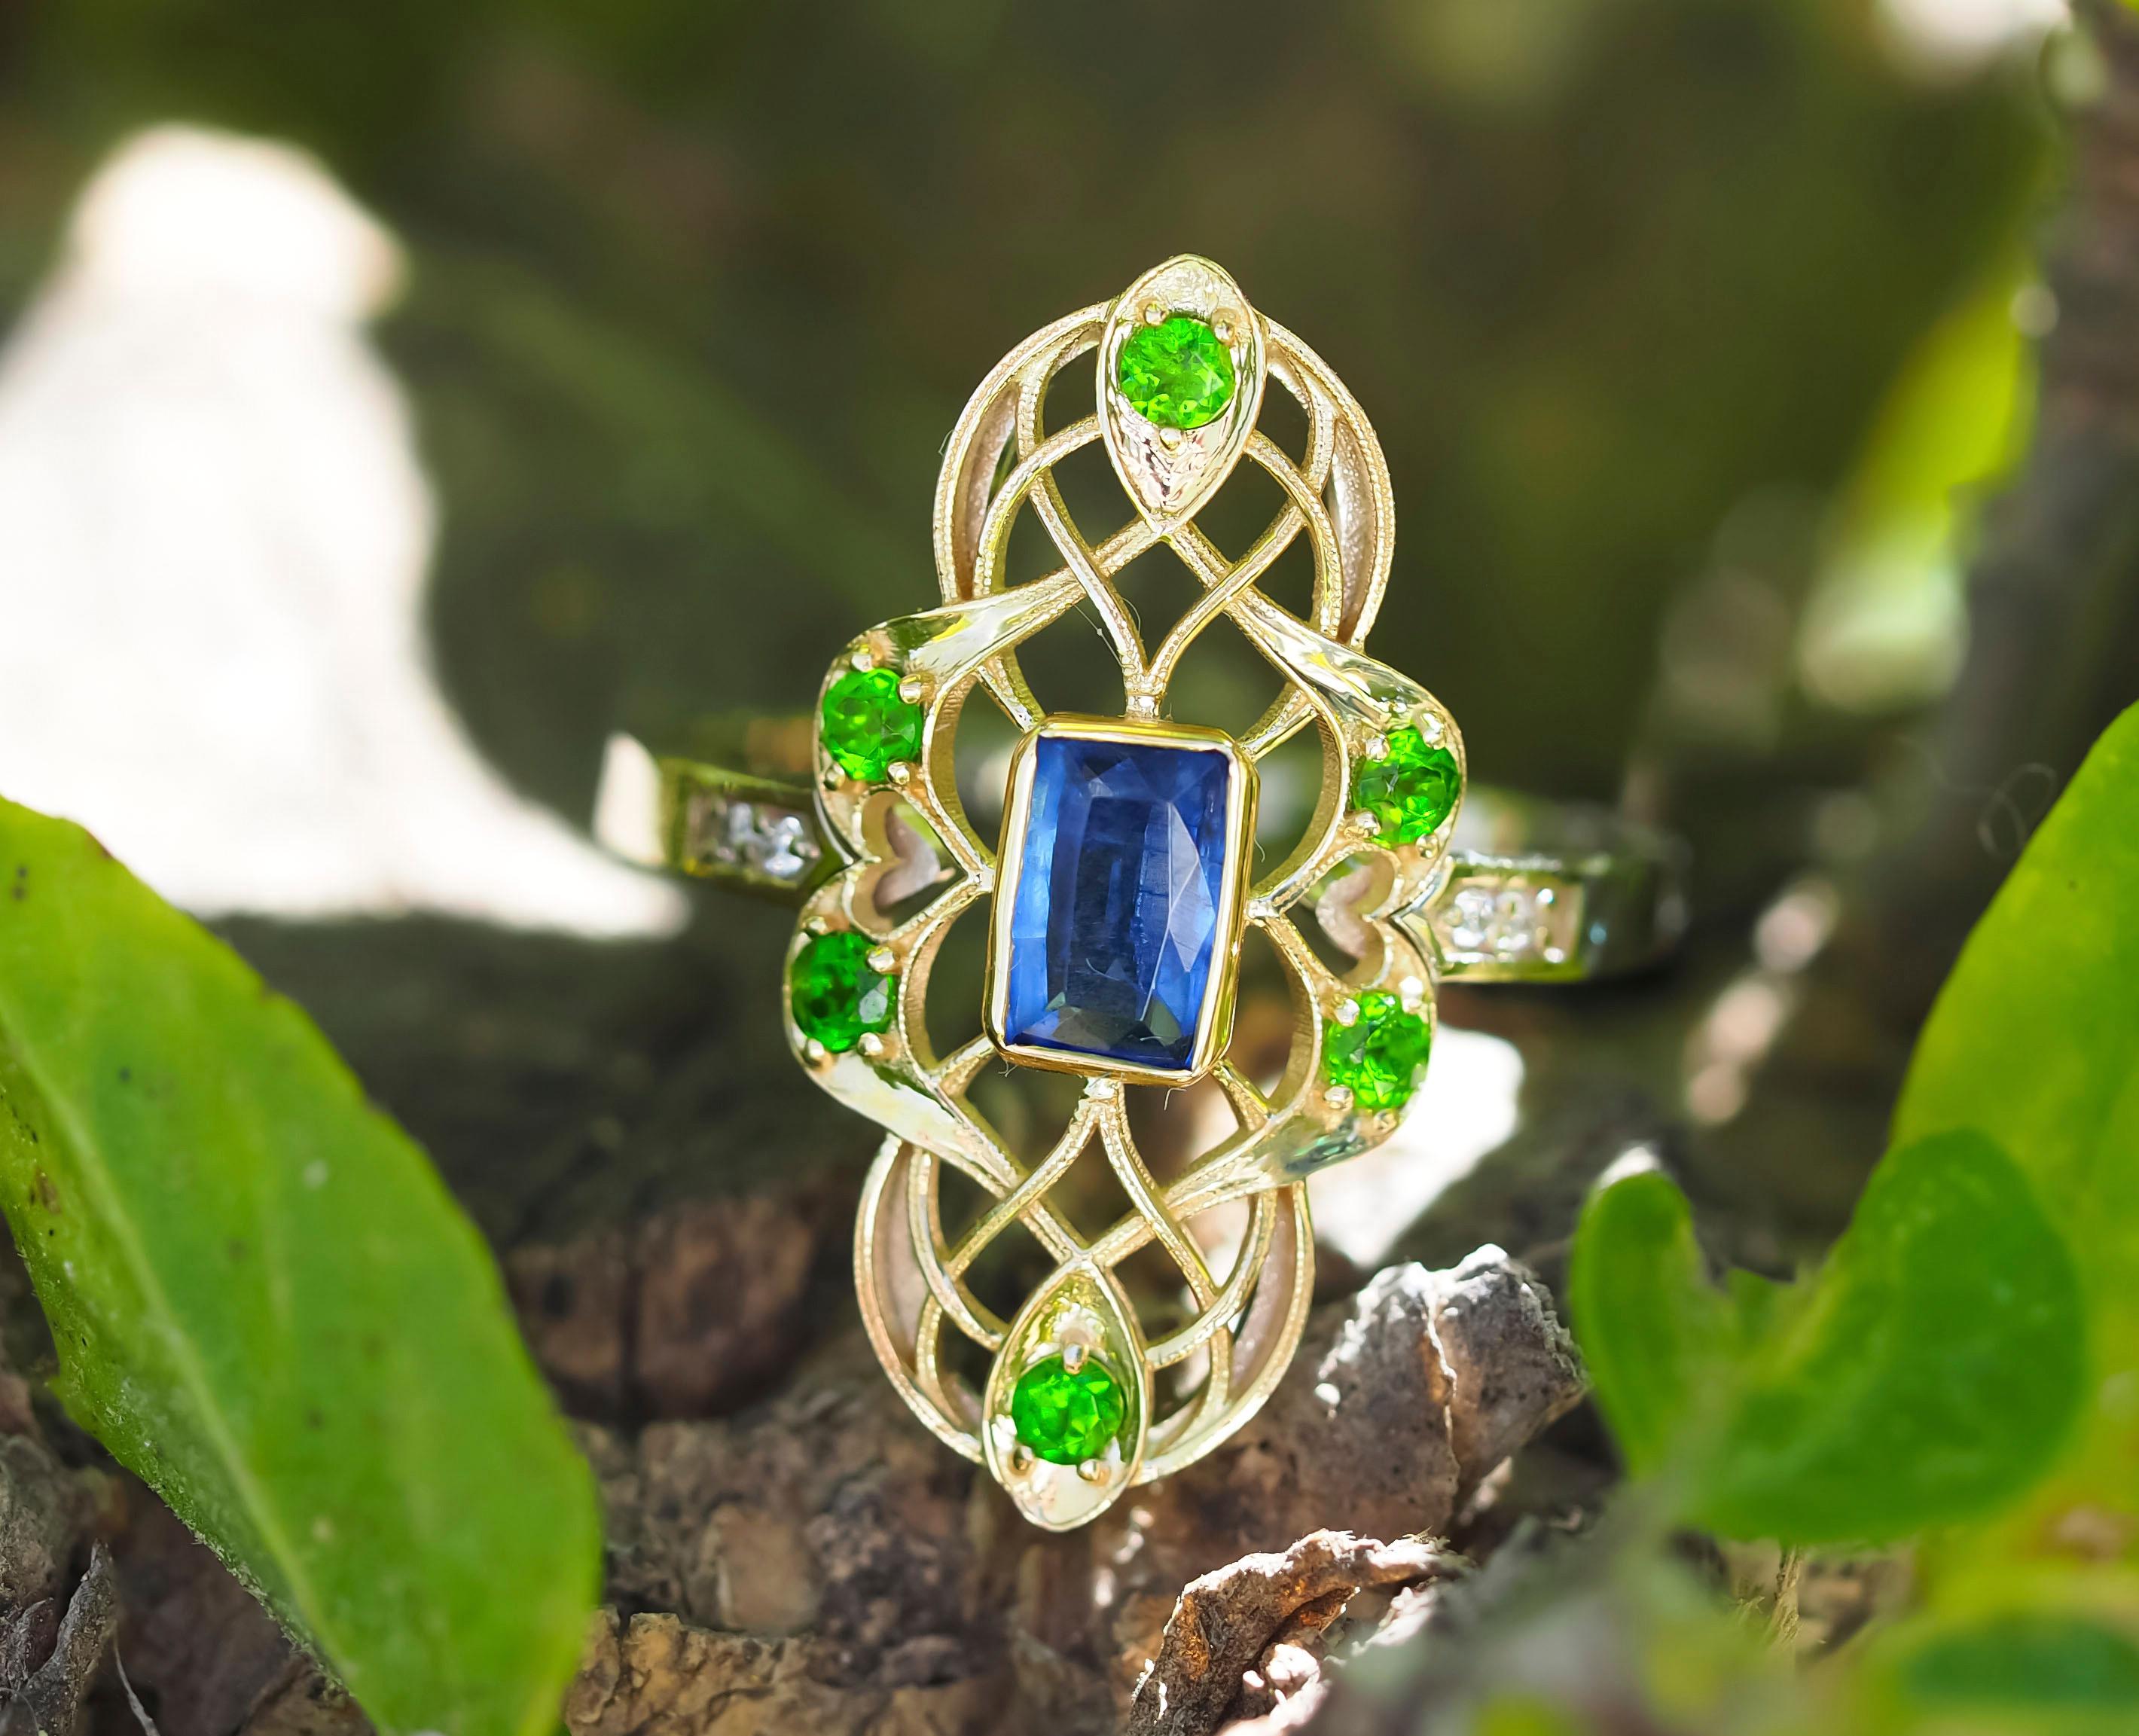 14k gold ring with kyanite, chrome diapsides, diamonds

14 k gold

total weight 2.75 gr

Gemstones (all are tested by proffesional gemmologist)

Kyanite
Octagon cut, 0.8 ct, transparent, royal blue green color. 

Diamonds
Round brilliant cut, G/VS,